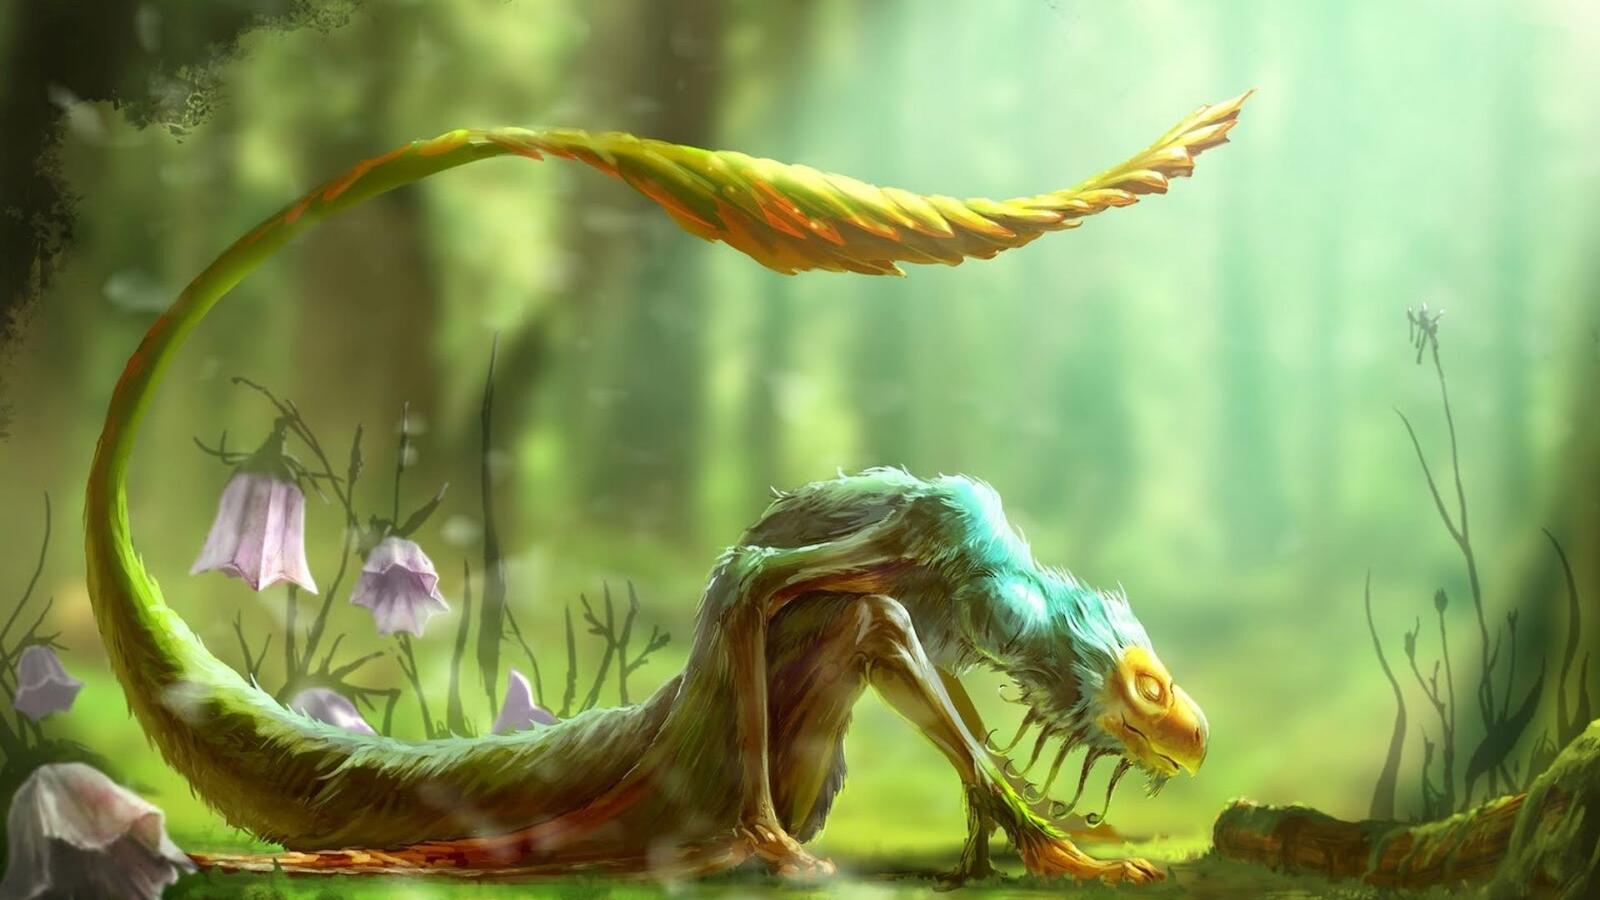 Wallpapers fairytale creature long tail work of art on the desktop